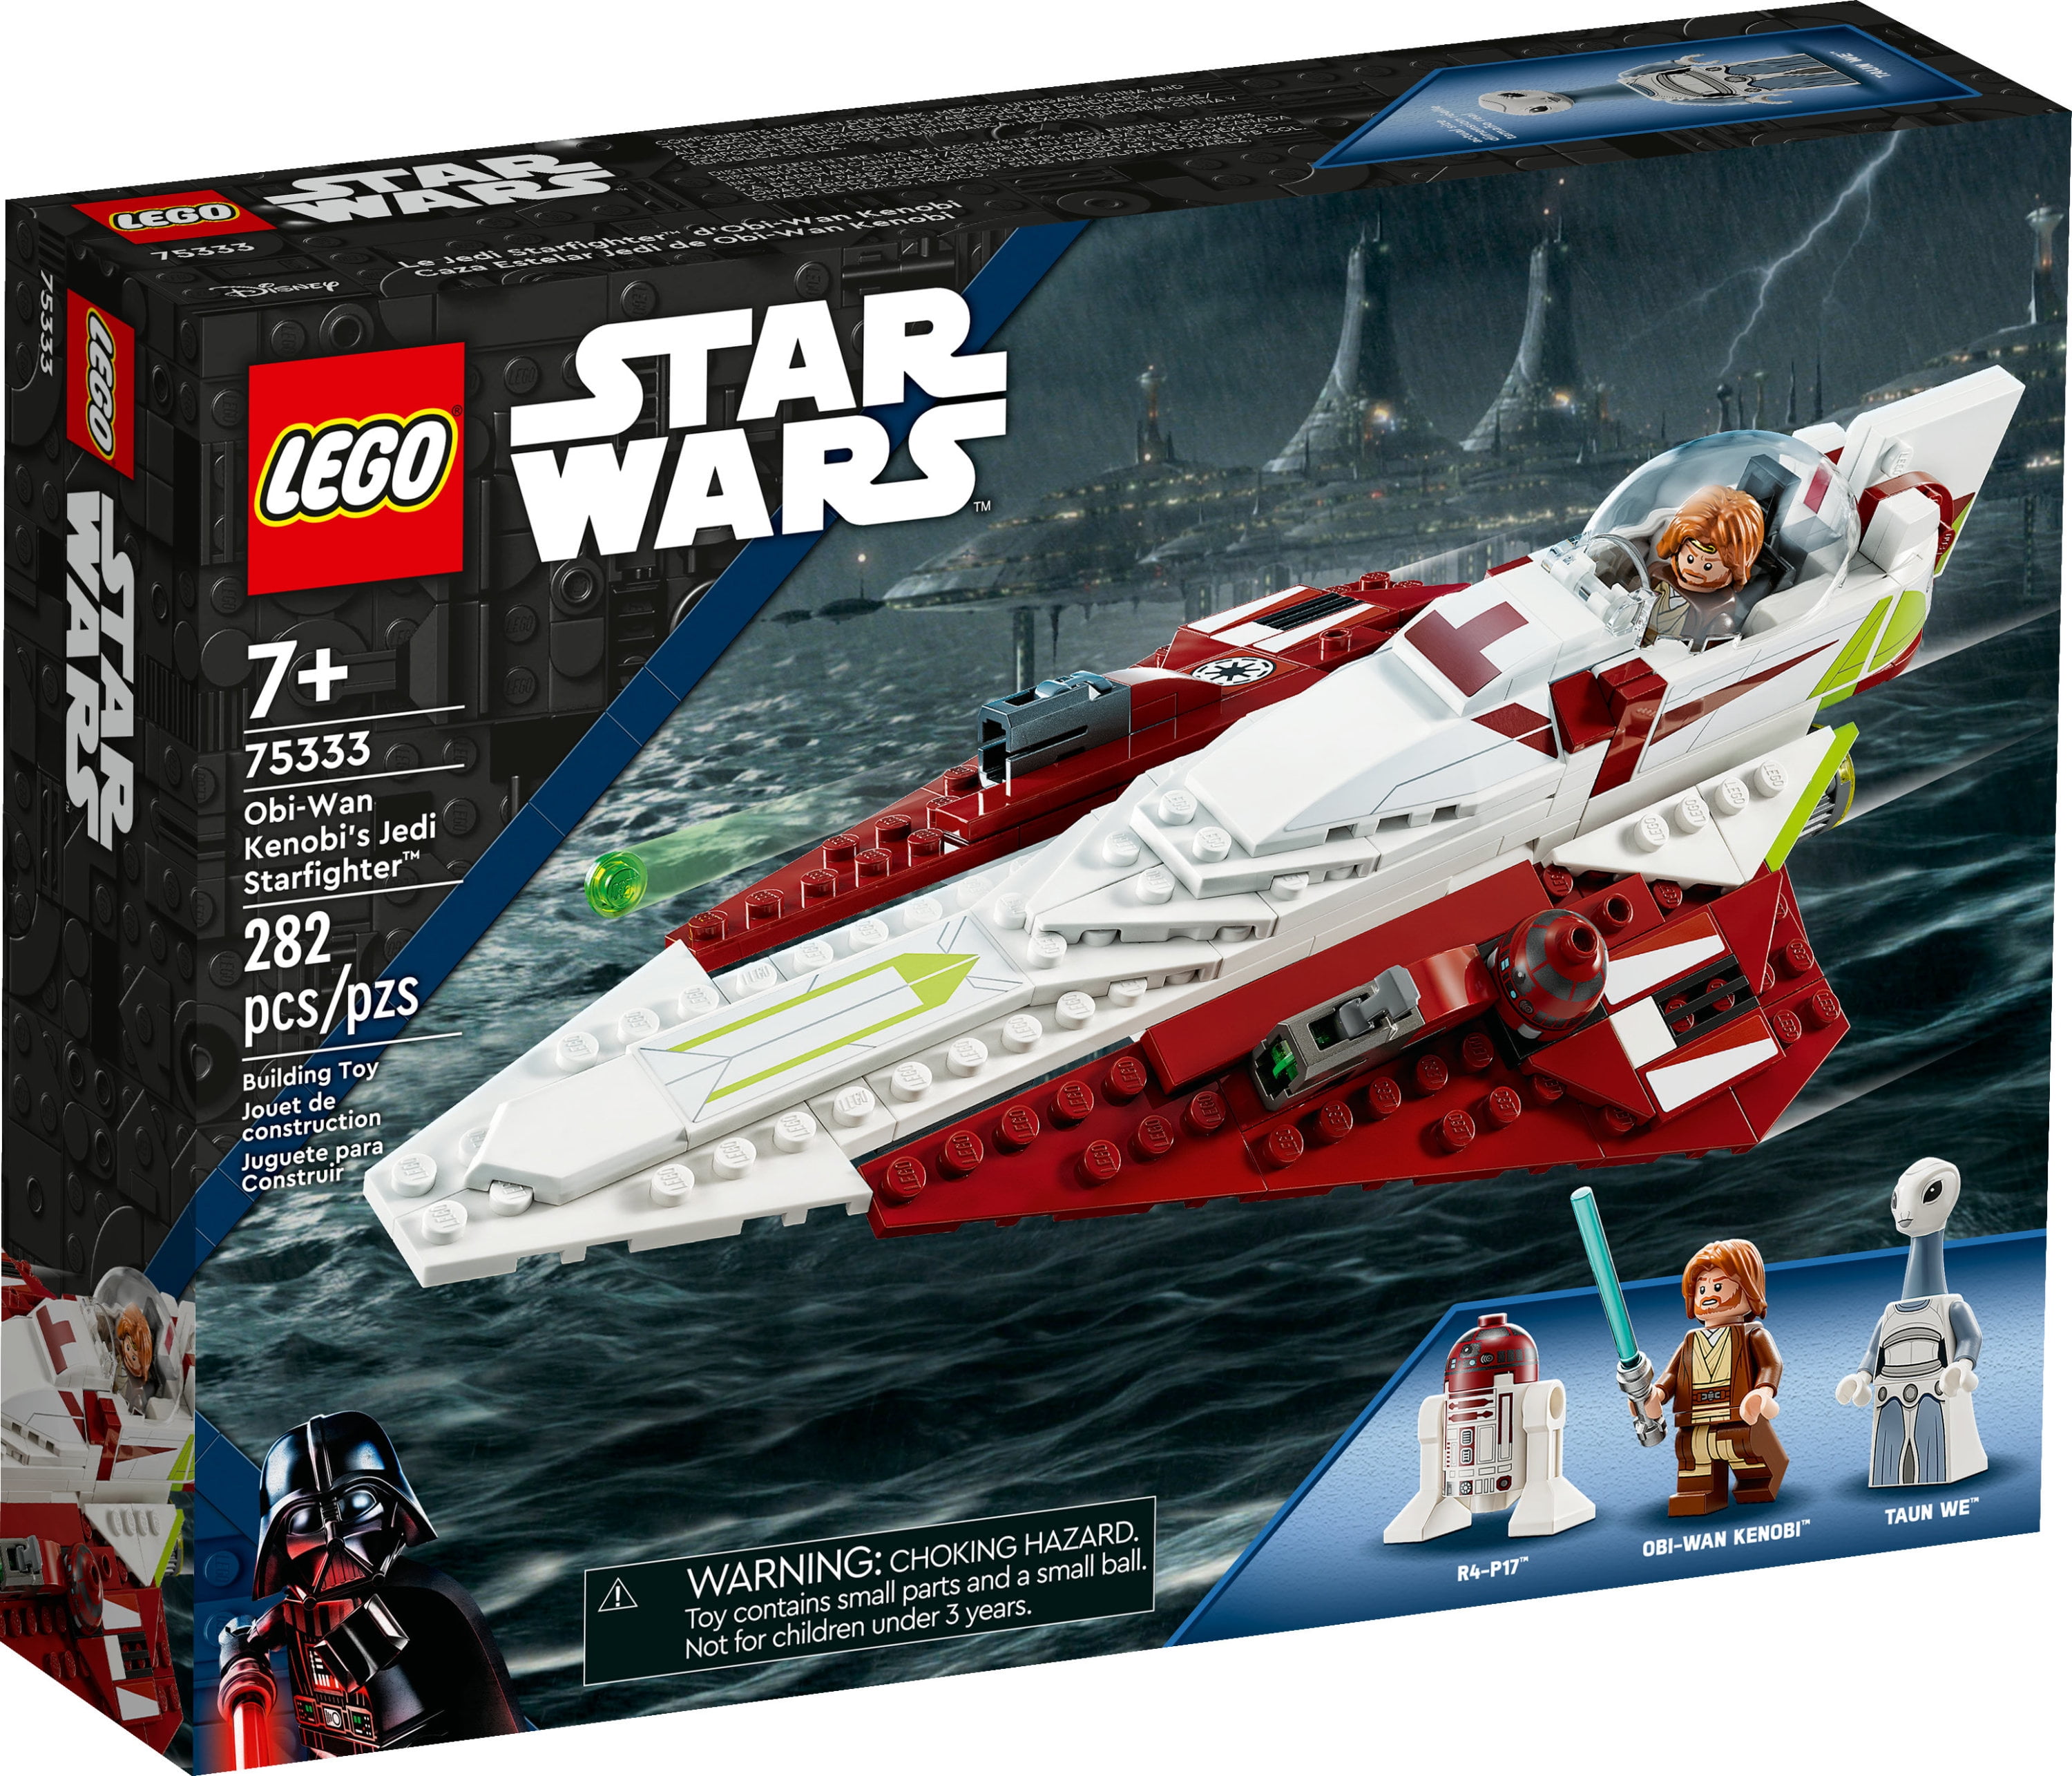 LEGO Star Wars Obi-Wan Jedi Starfighter 75333, Buildable Toy with Taun We Minifigure, Droid Figure and Lightsaber, Attack of the Clones - Walmart.com